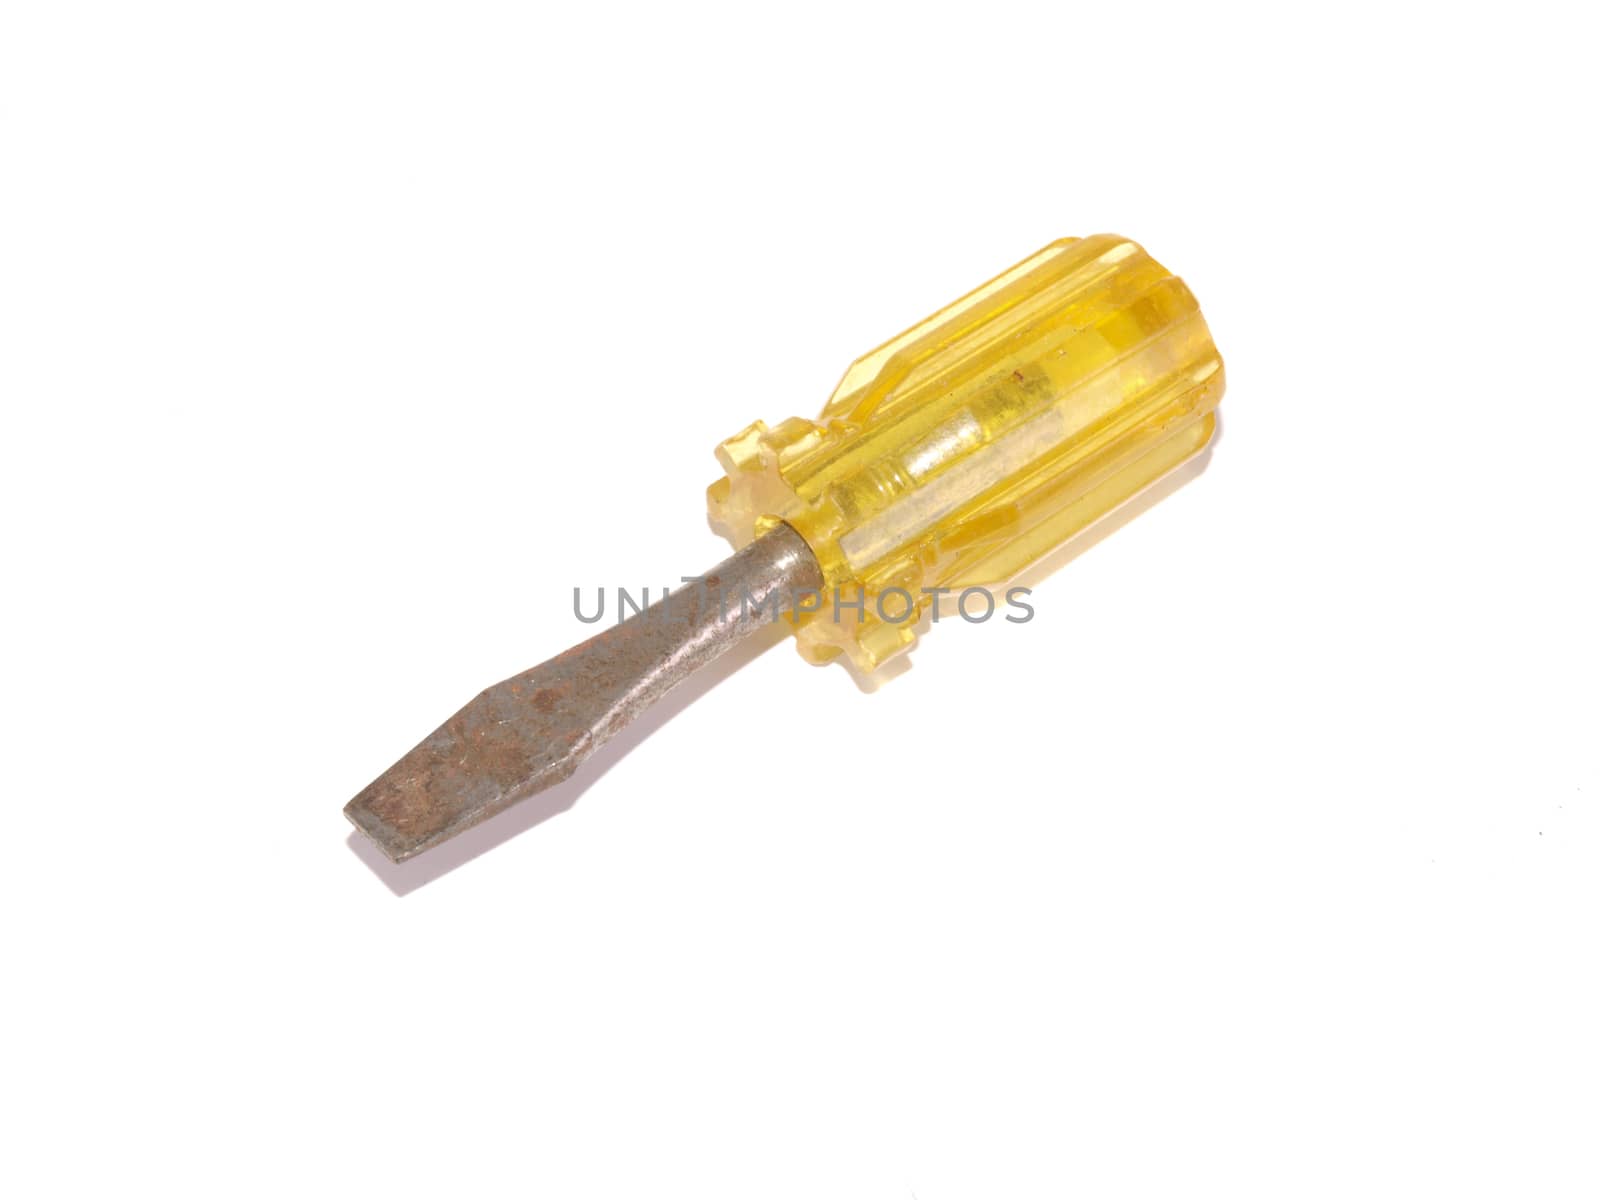 Yellow handeled screw driver on a white background.